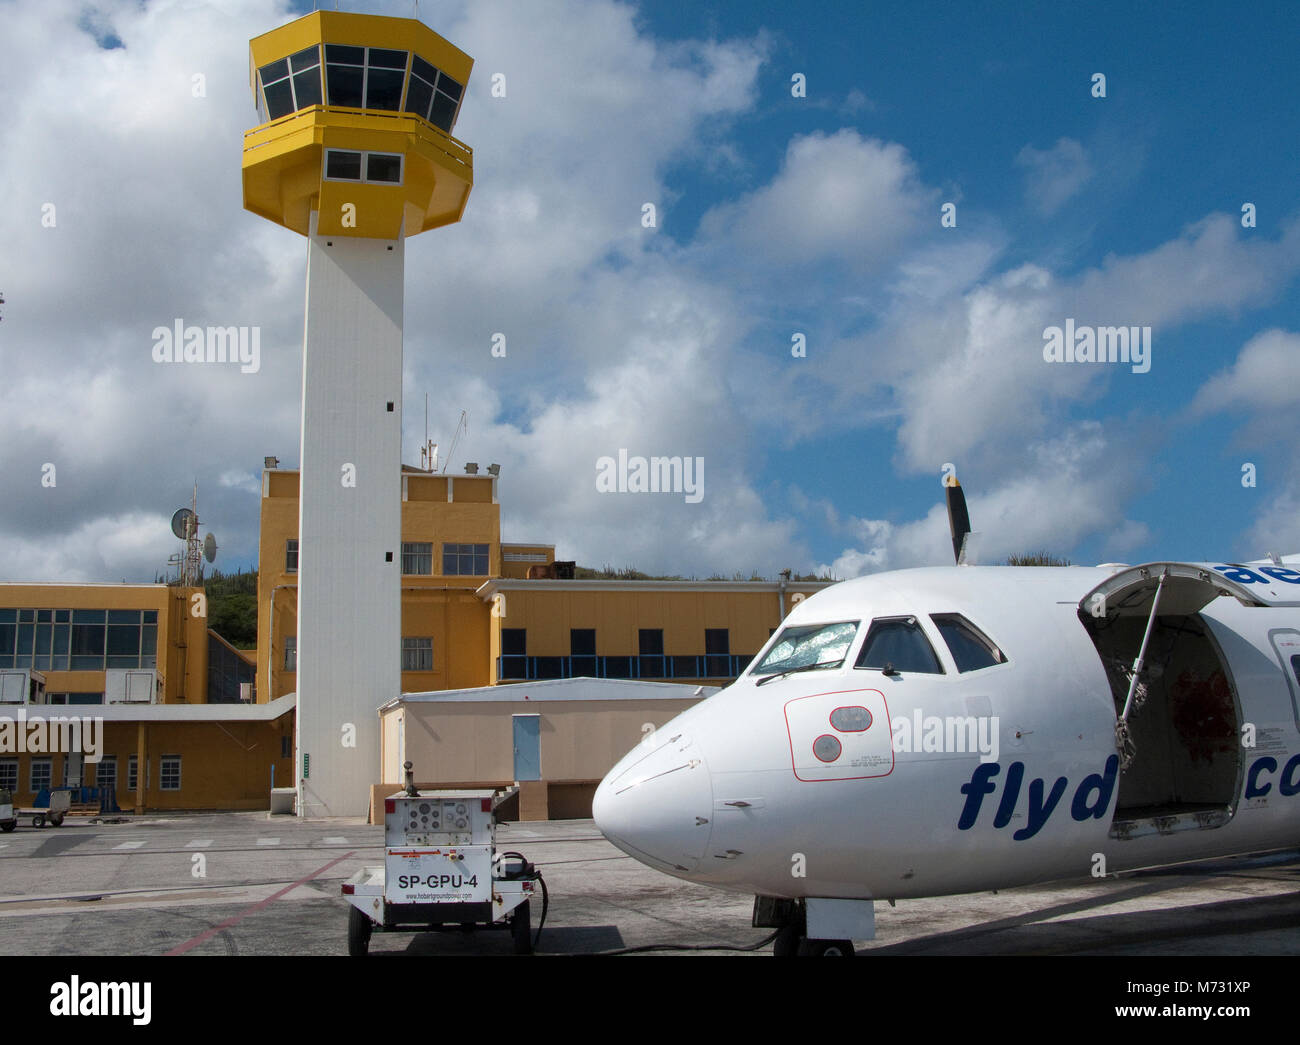 Unloading of a Turbo prop at Hato International Airport, Curacao, Netherlands Antilles, Caribbean, Caribbean sea Stock Photo